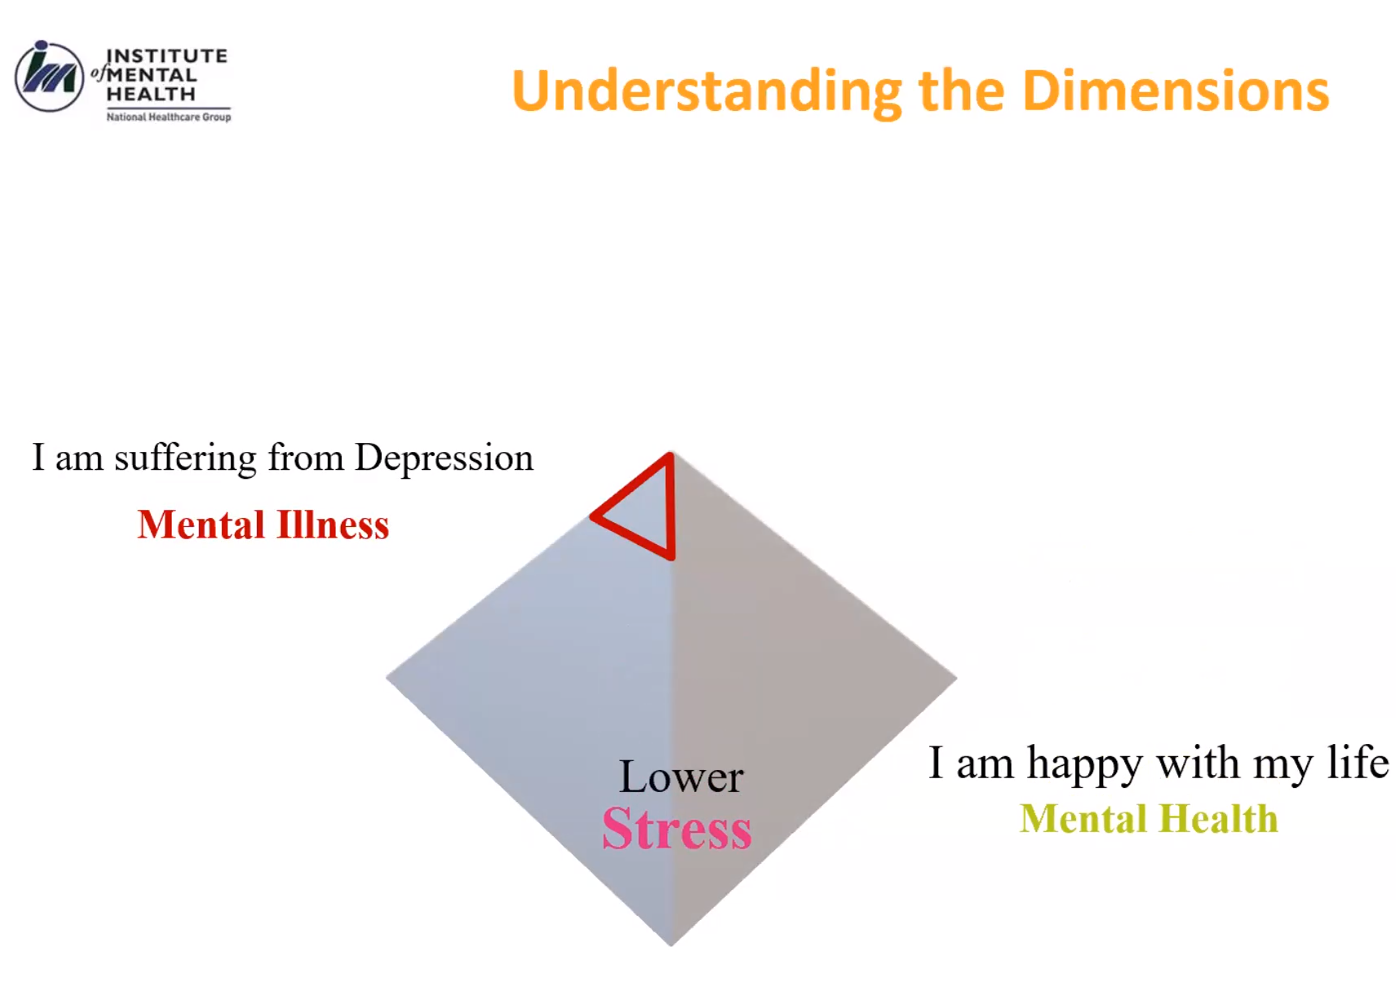 Instead of viewing mental illness as the tip of pyramid  while mental health is at the base, Dr Daniel Fung talke about how mental illness really should be seen on one face of the pyramid while mental health on the other. Photo courtesy of Dr Daniel Fung. 